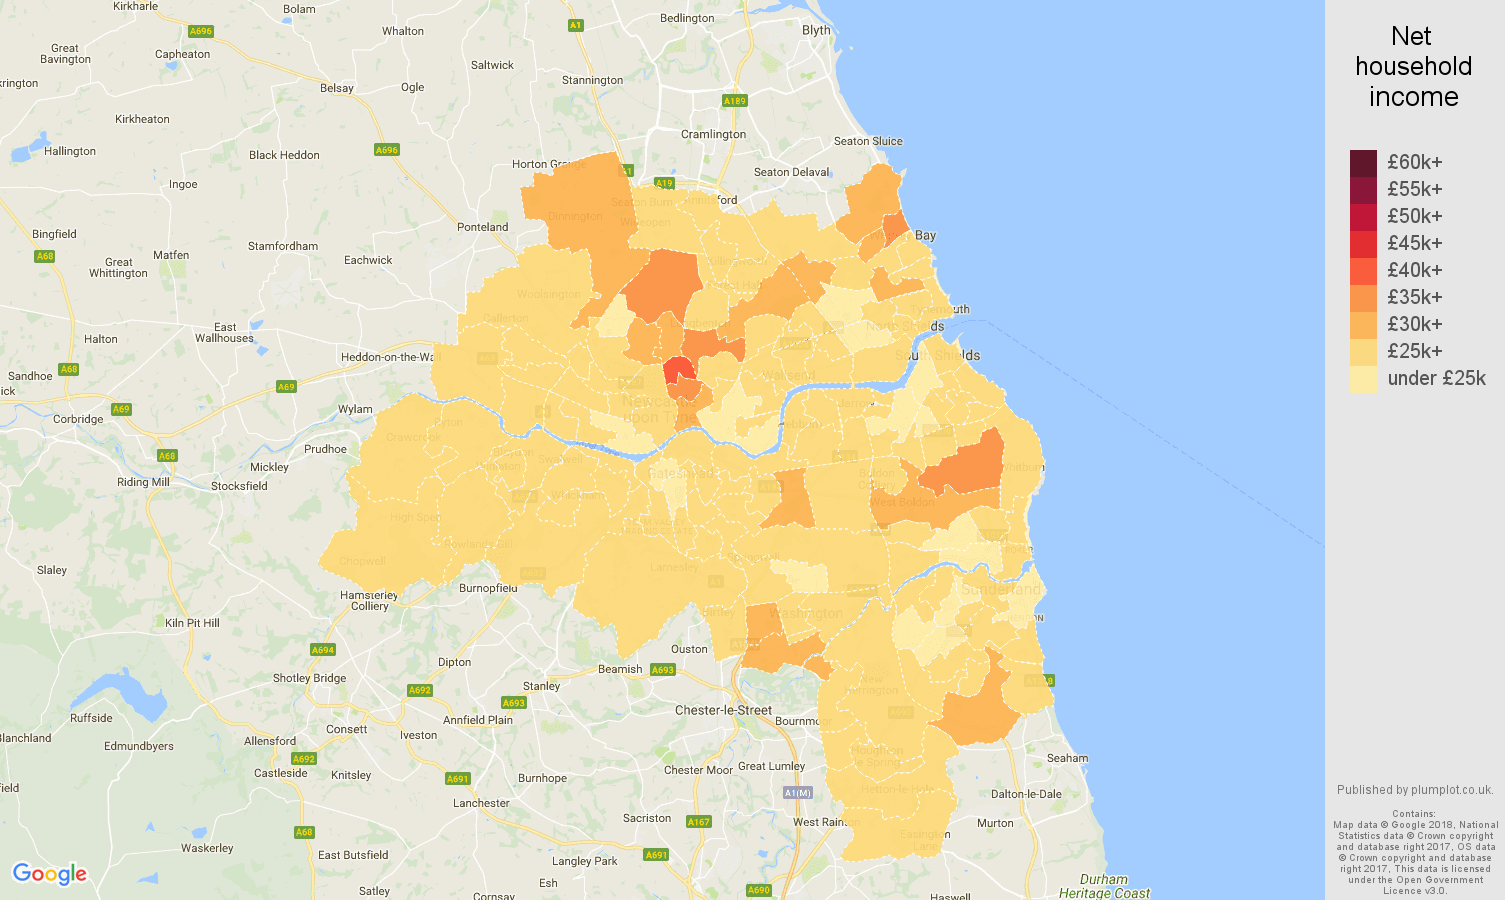 Tyne and Wear net household income map